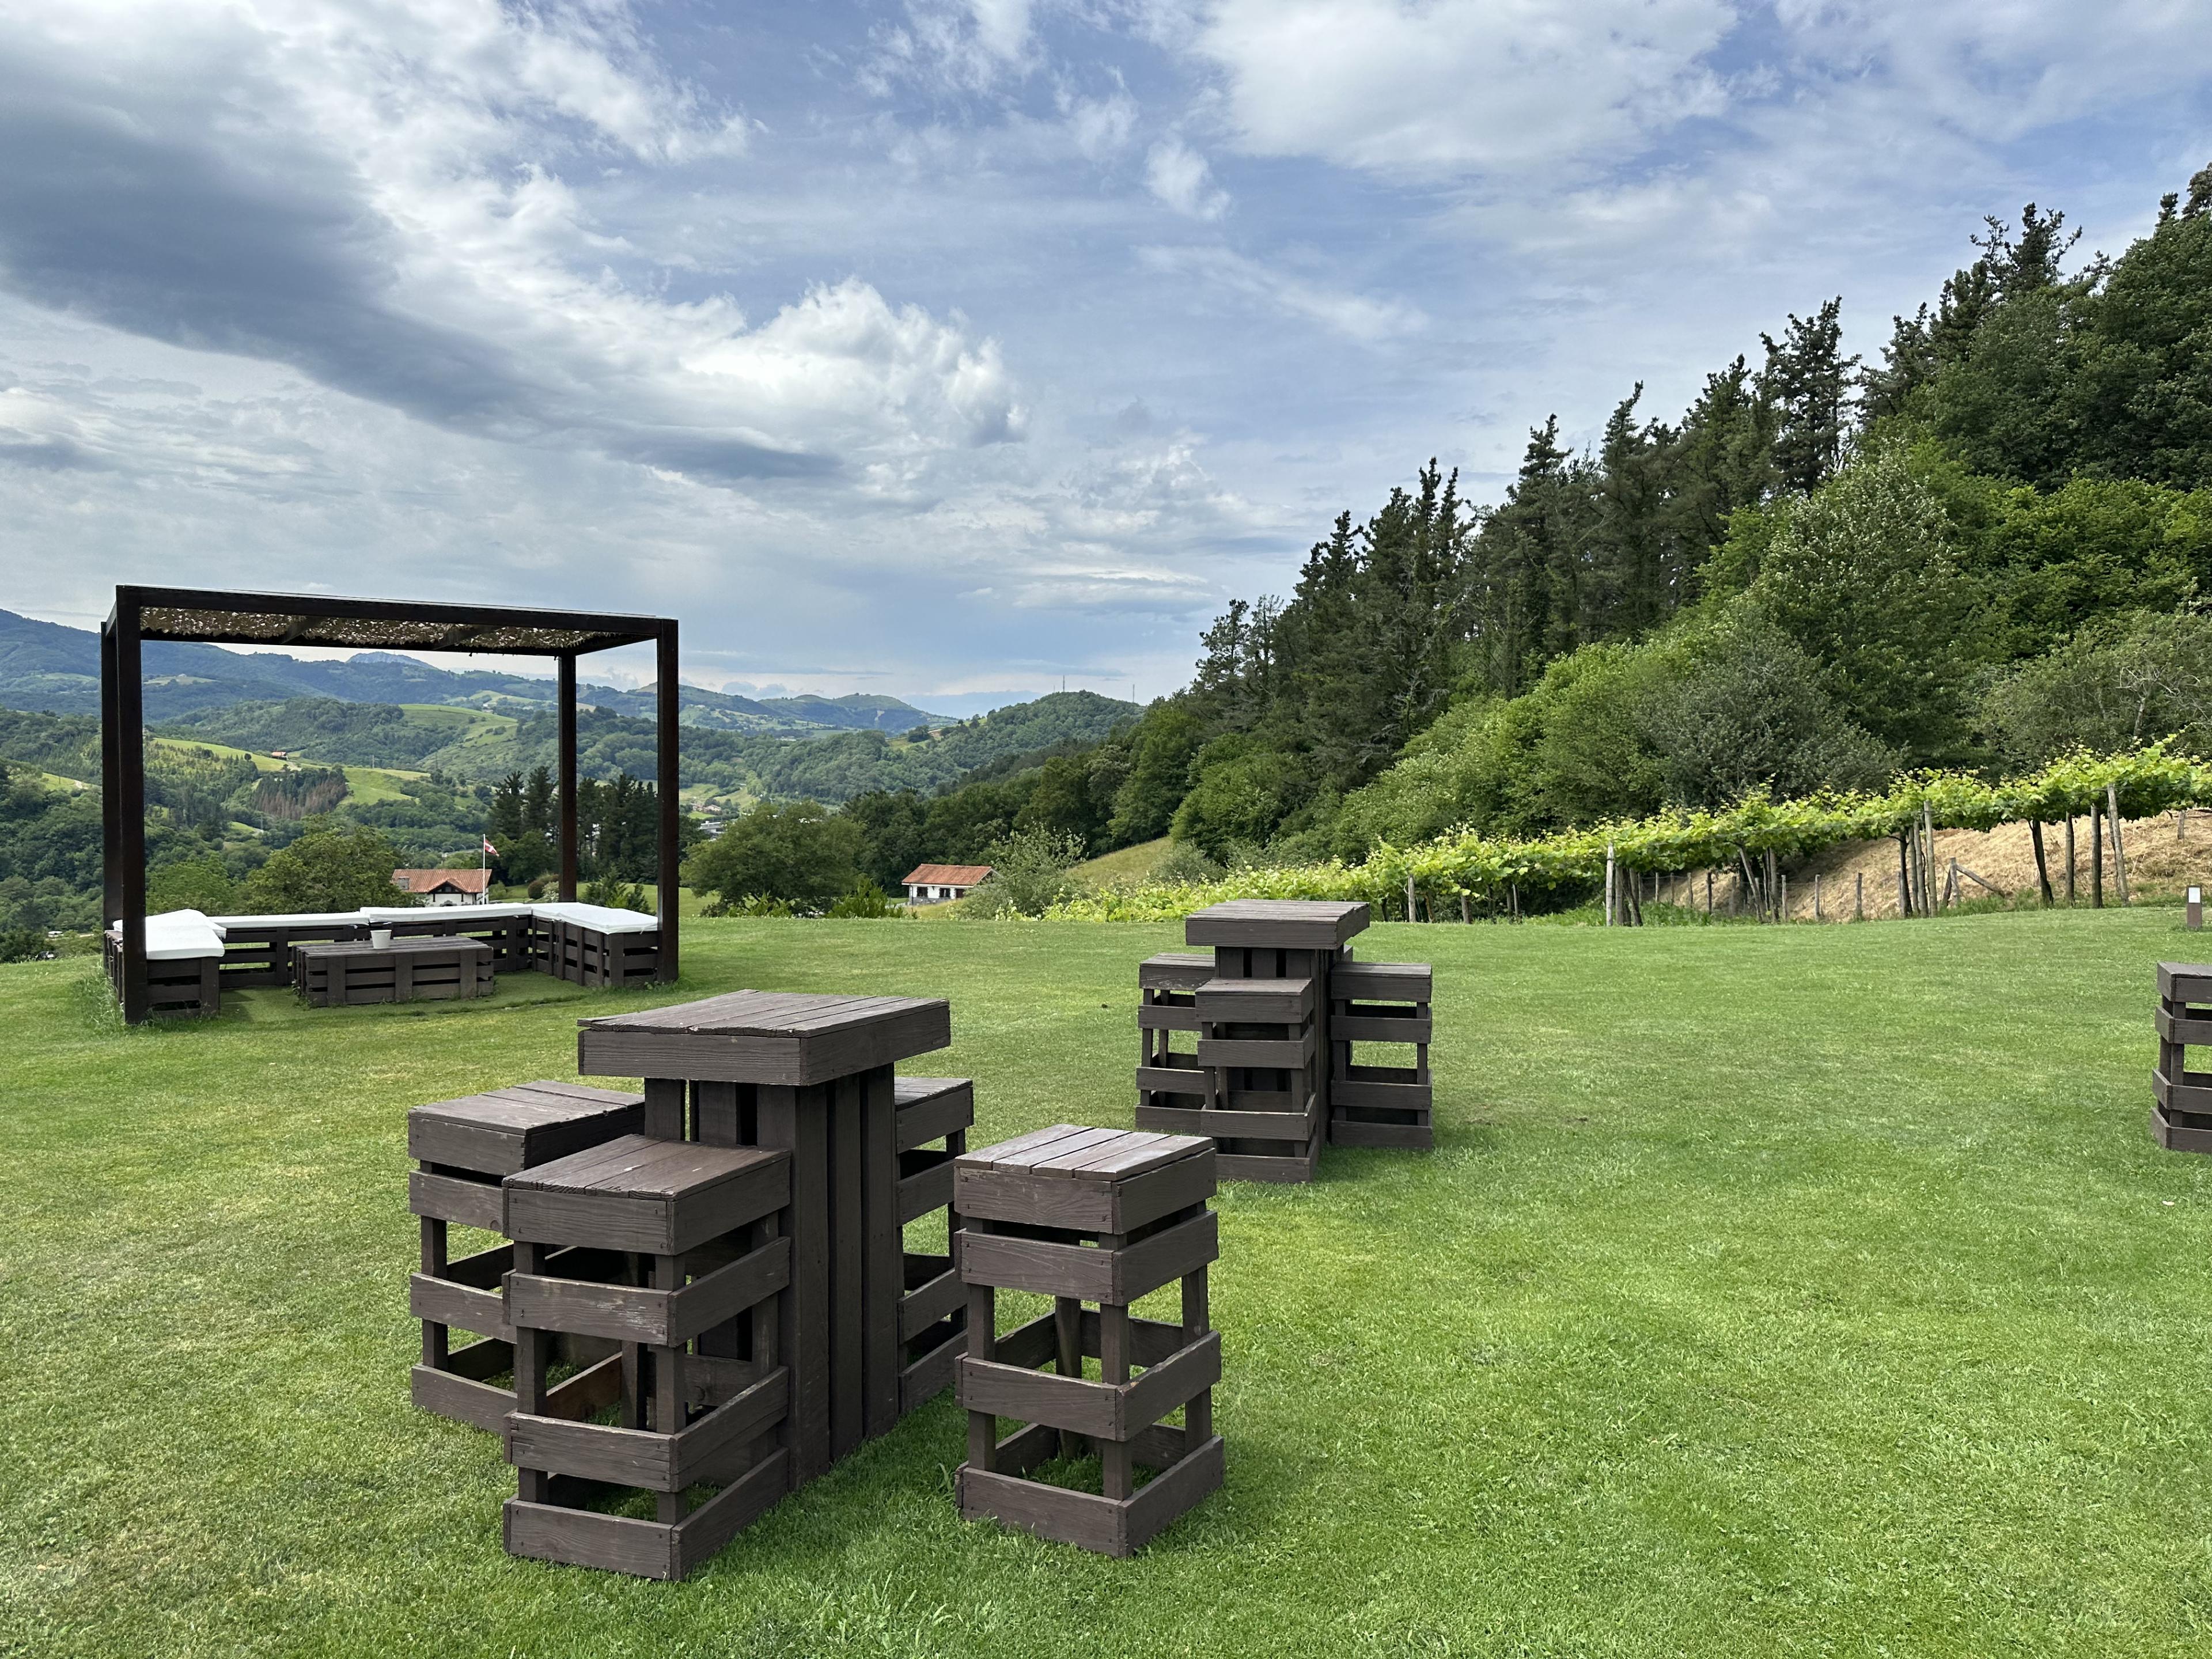 box shaped chairs out on a lawn